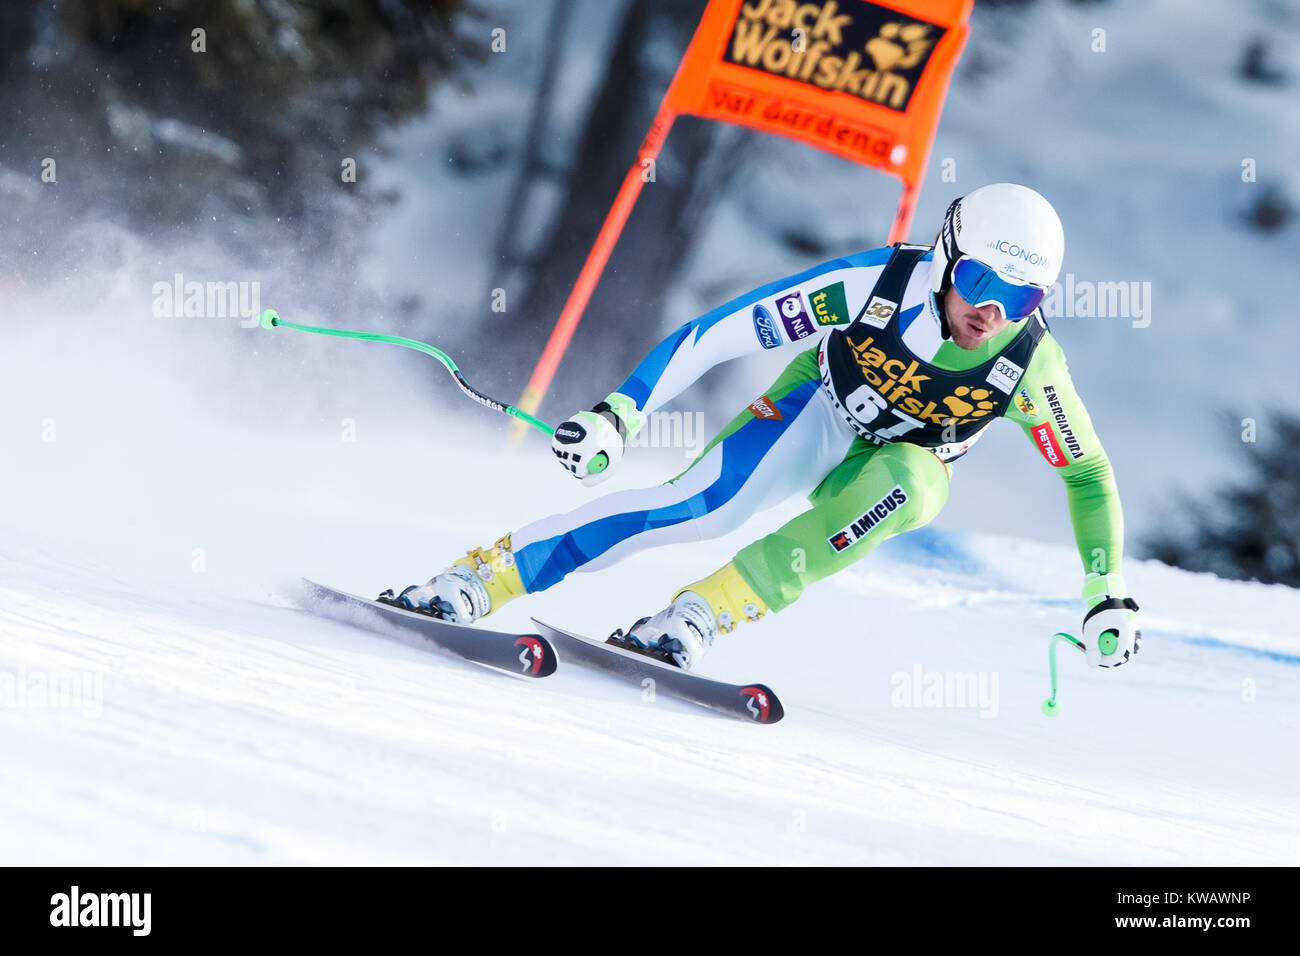 Val Gardena, Italy 16 December 2017. PERKO Rok (Slo) competing in the Audi Fis Alpine Skiing World Cup Men’s Downhill Race on the Saslong Course Stock Photo